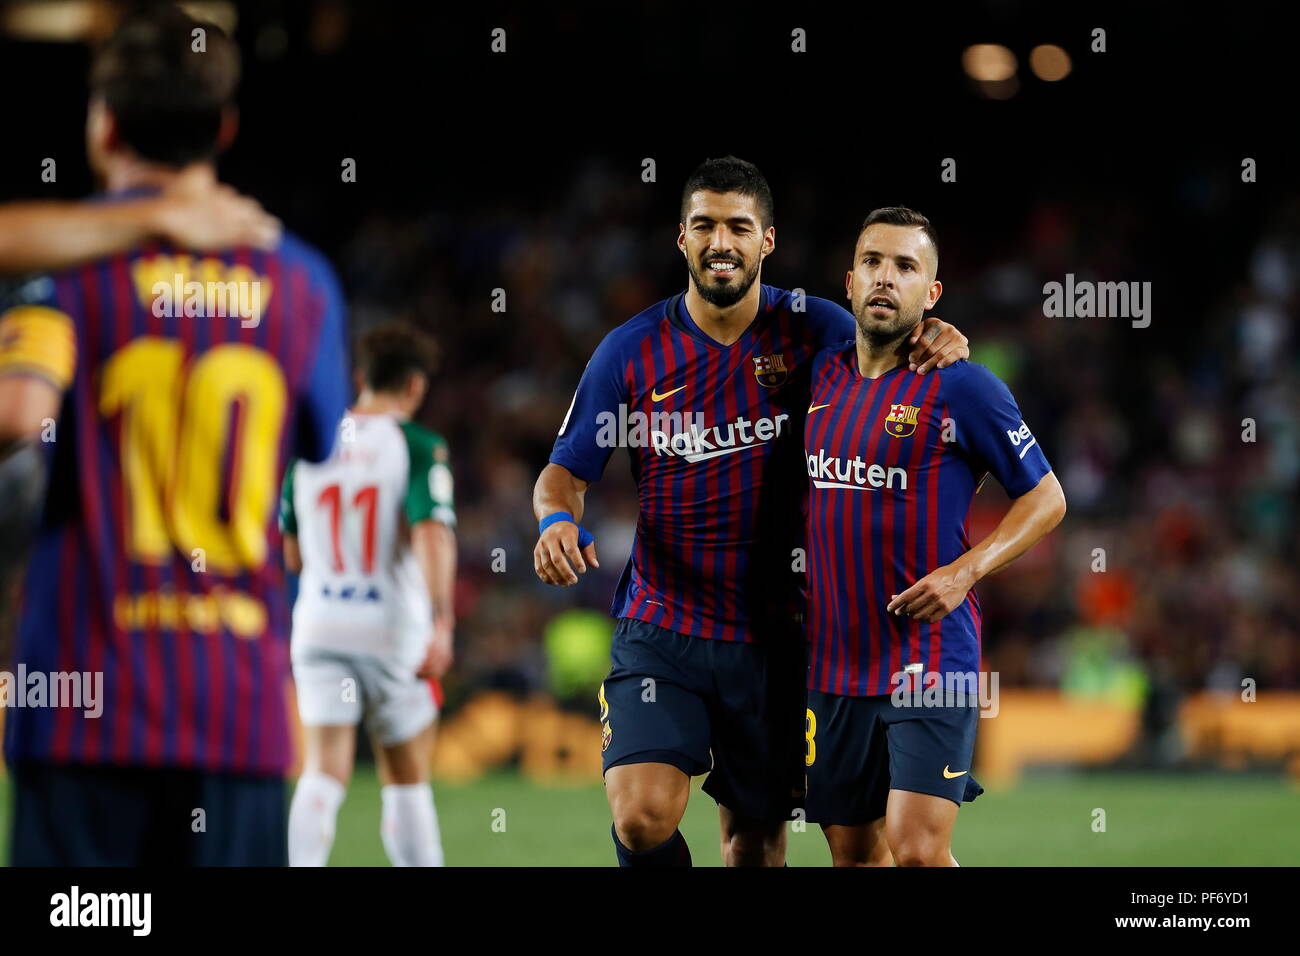 Messi's Stock Photos & Messi's Stock Images - Page 3 - Alamy